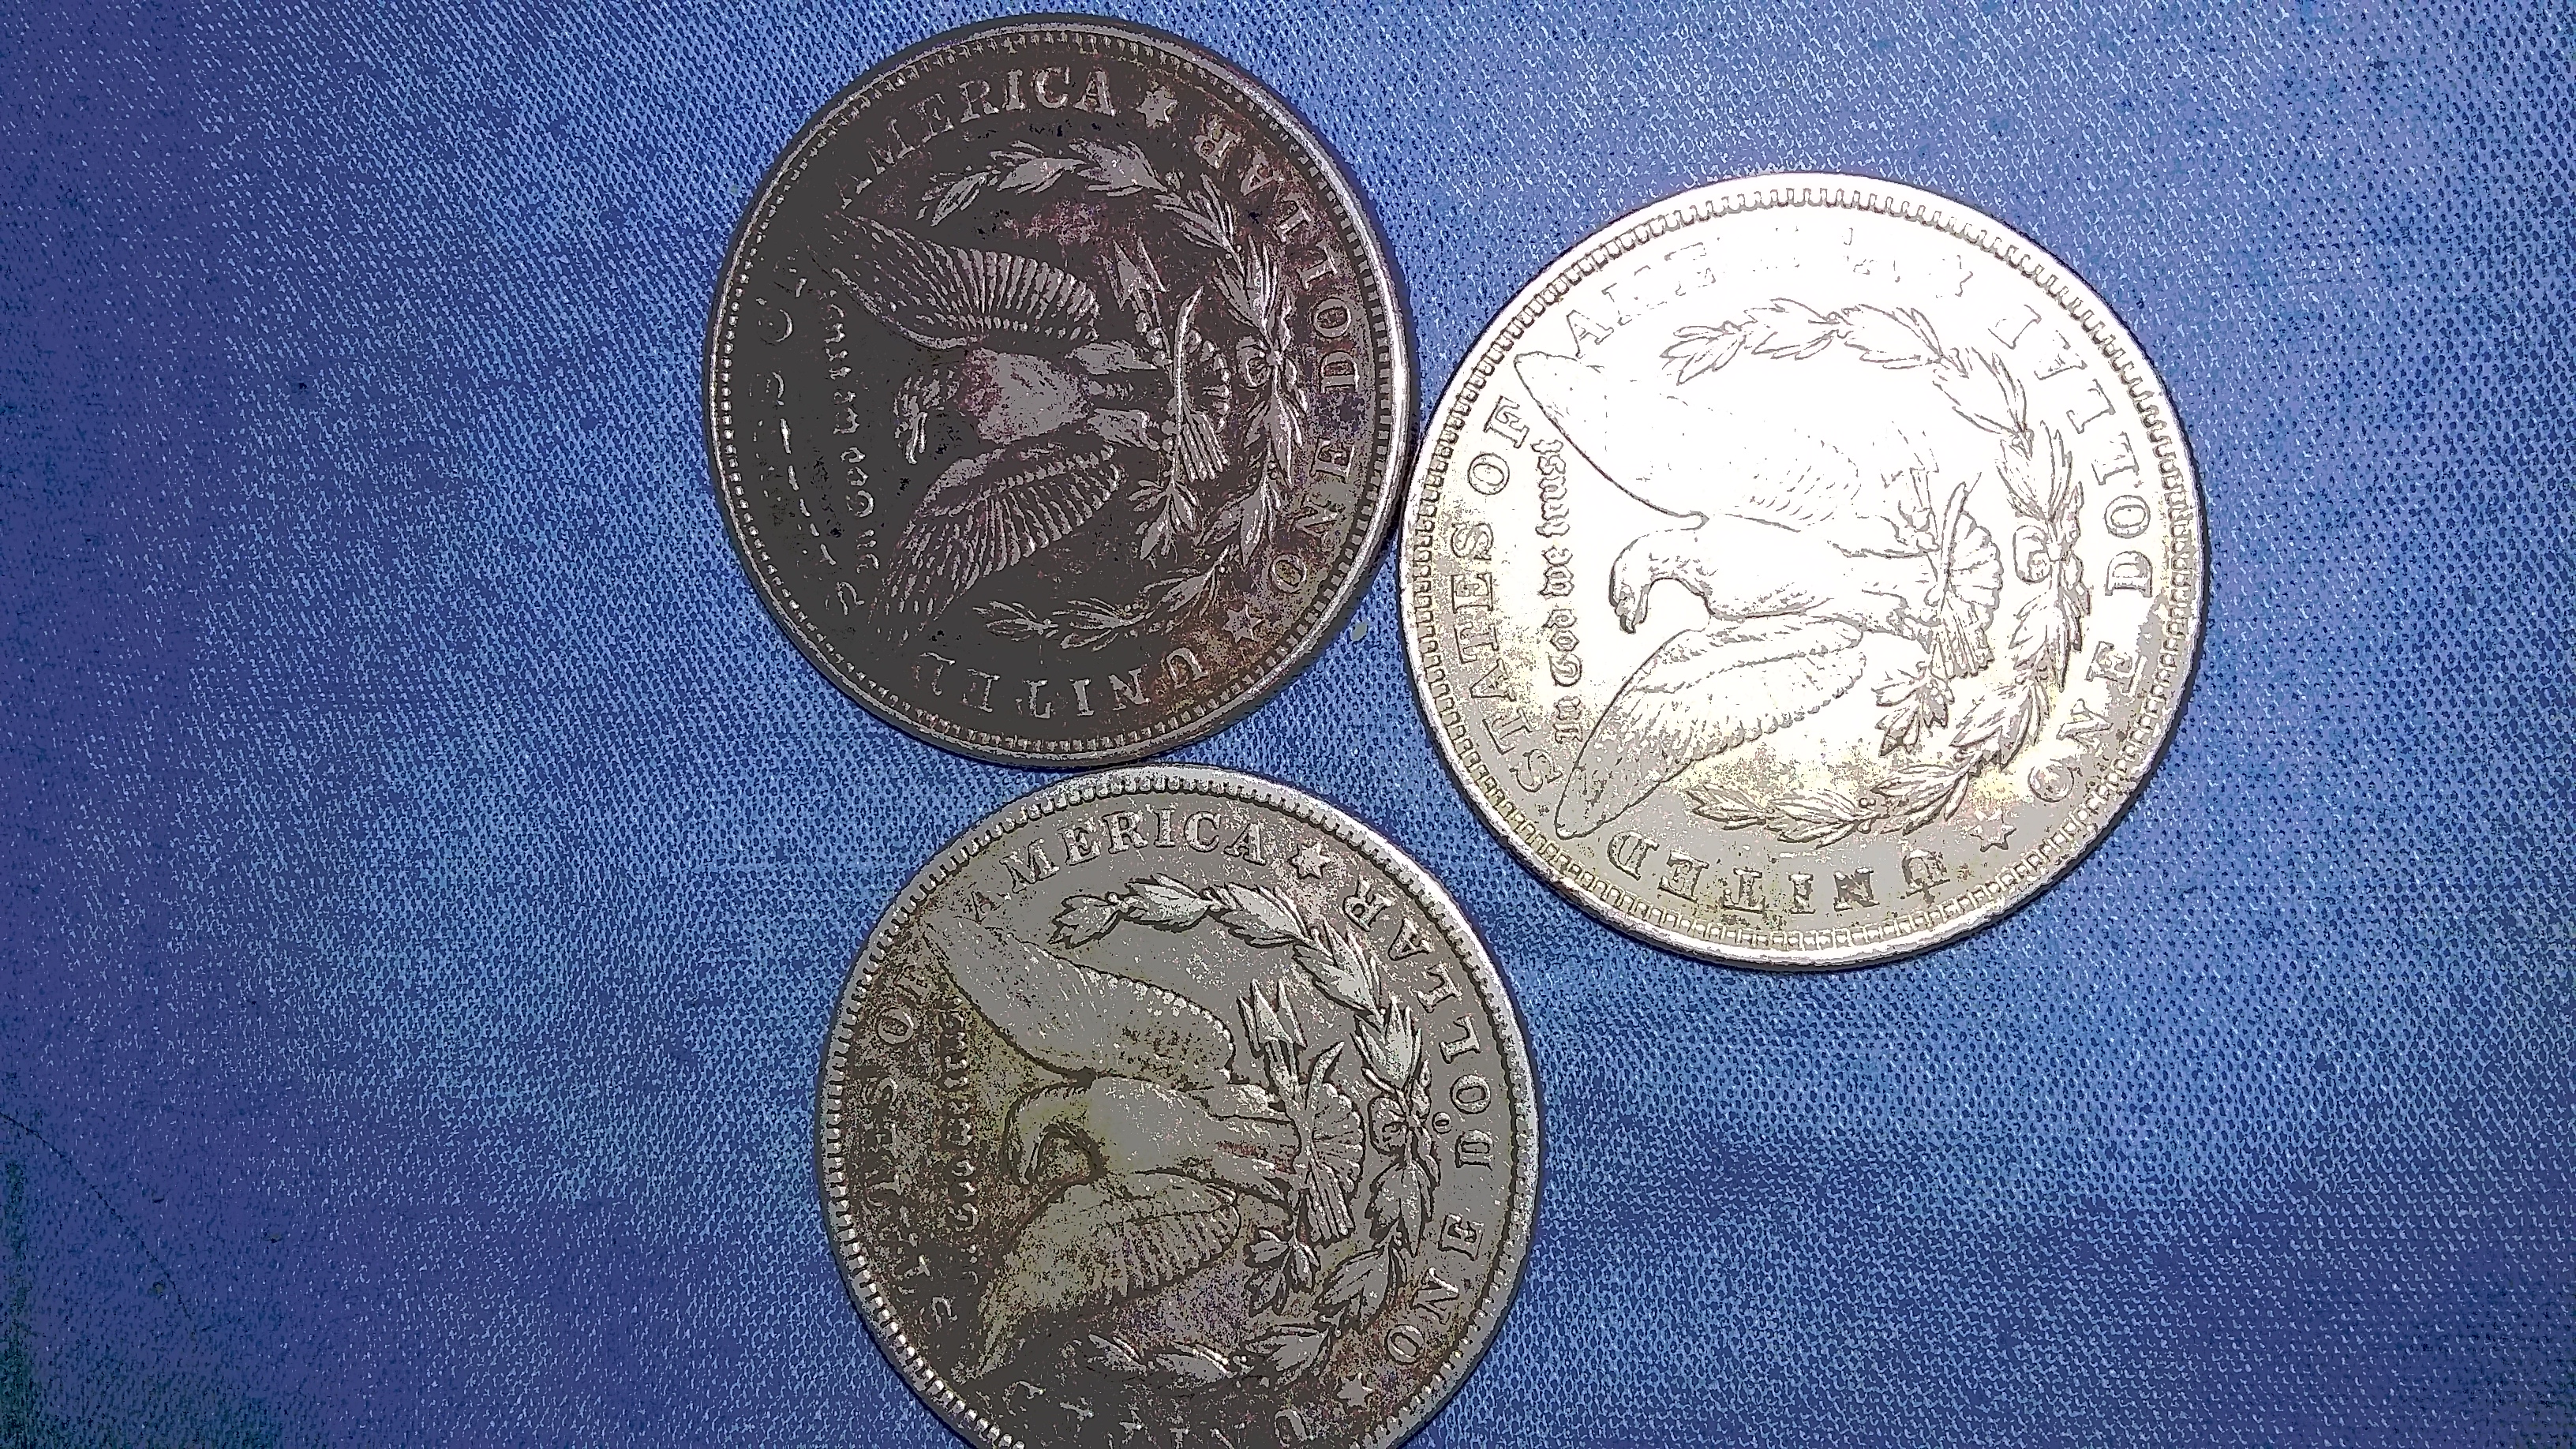 What are some facts about the composition of American coins?